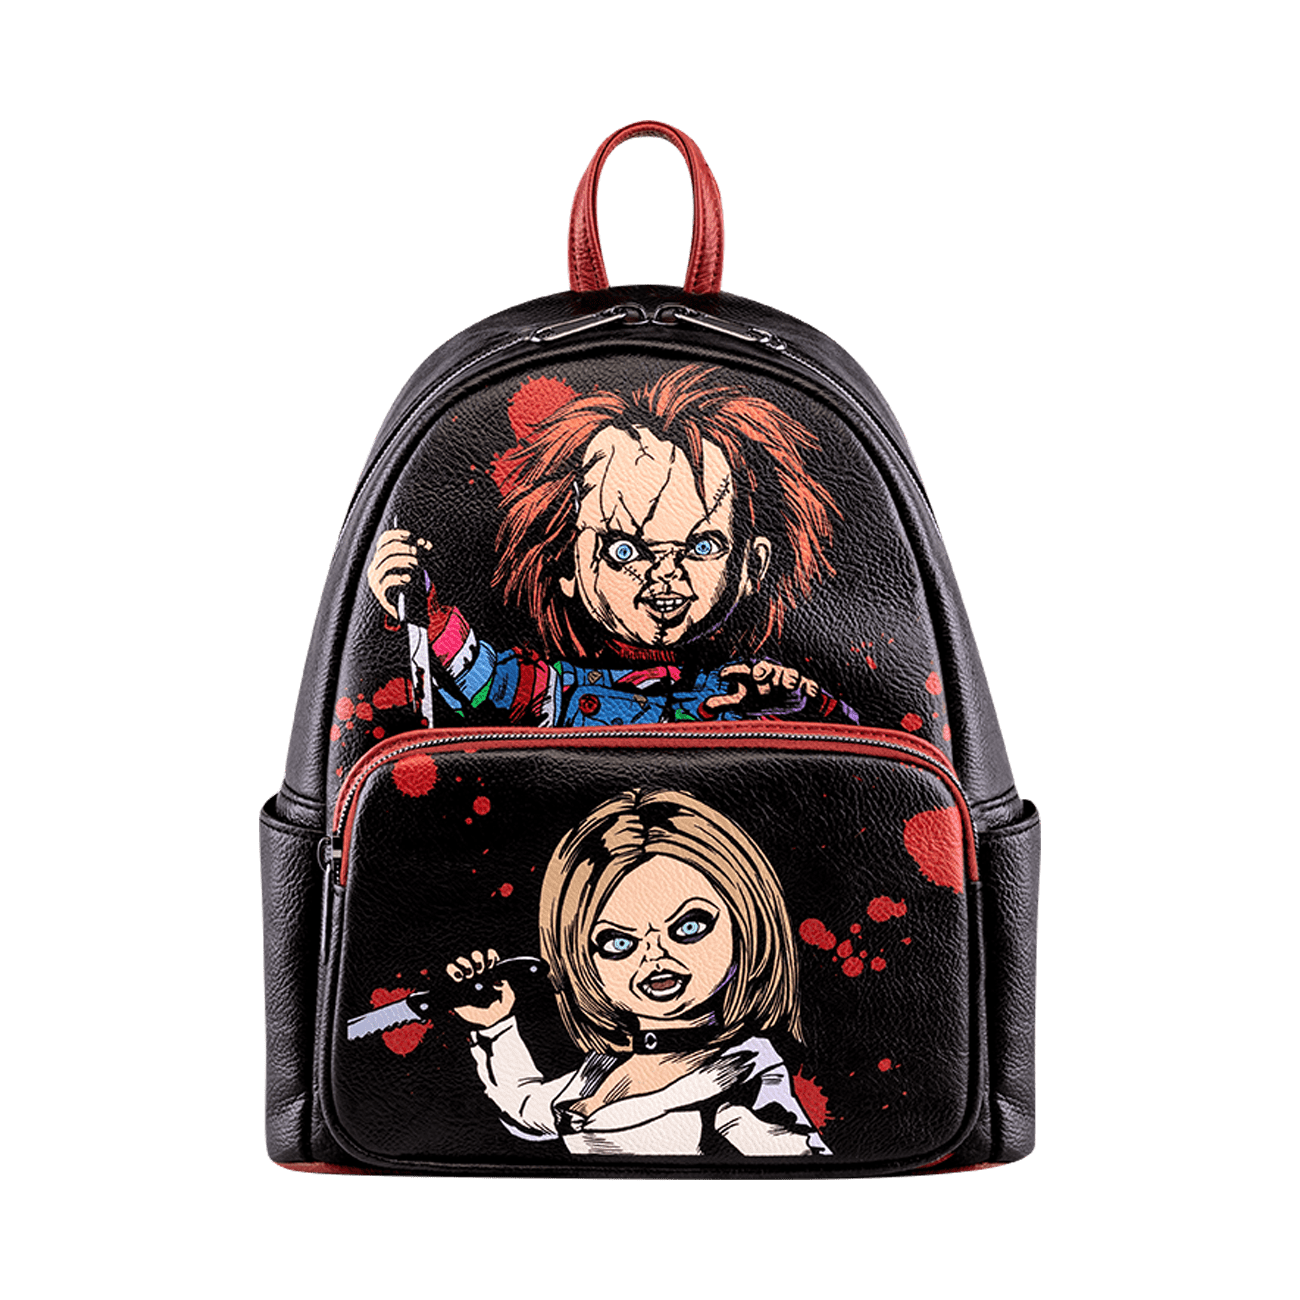 Chucky Trick or Treat Bag, Tiffany Trick or Treat Bag, Child's